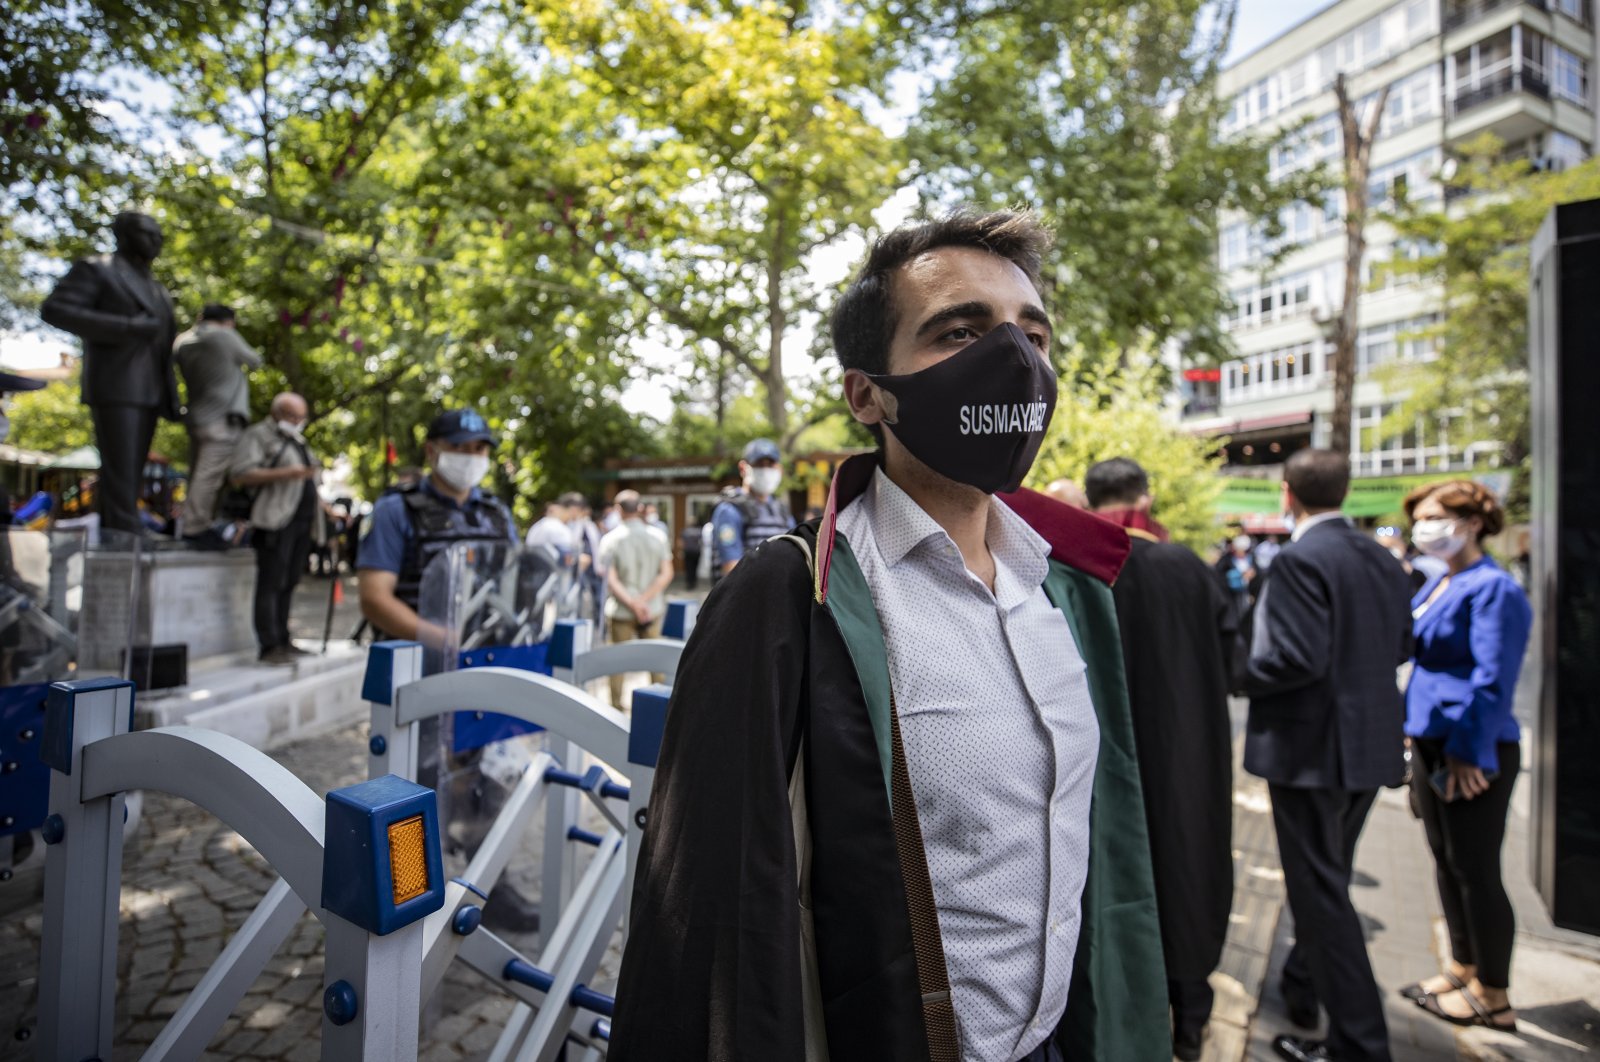 A lawyer wearing a face mask with the phrase “We will not be silenced” on it stands in protest against the controversial bar regulation in Ankara’s Kuğulu Park, Turkey, July 6, 2020. (AA Photo)